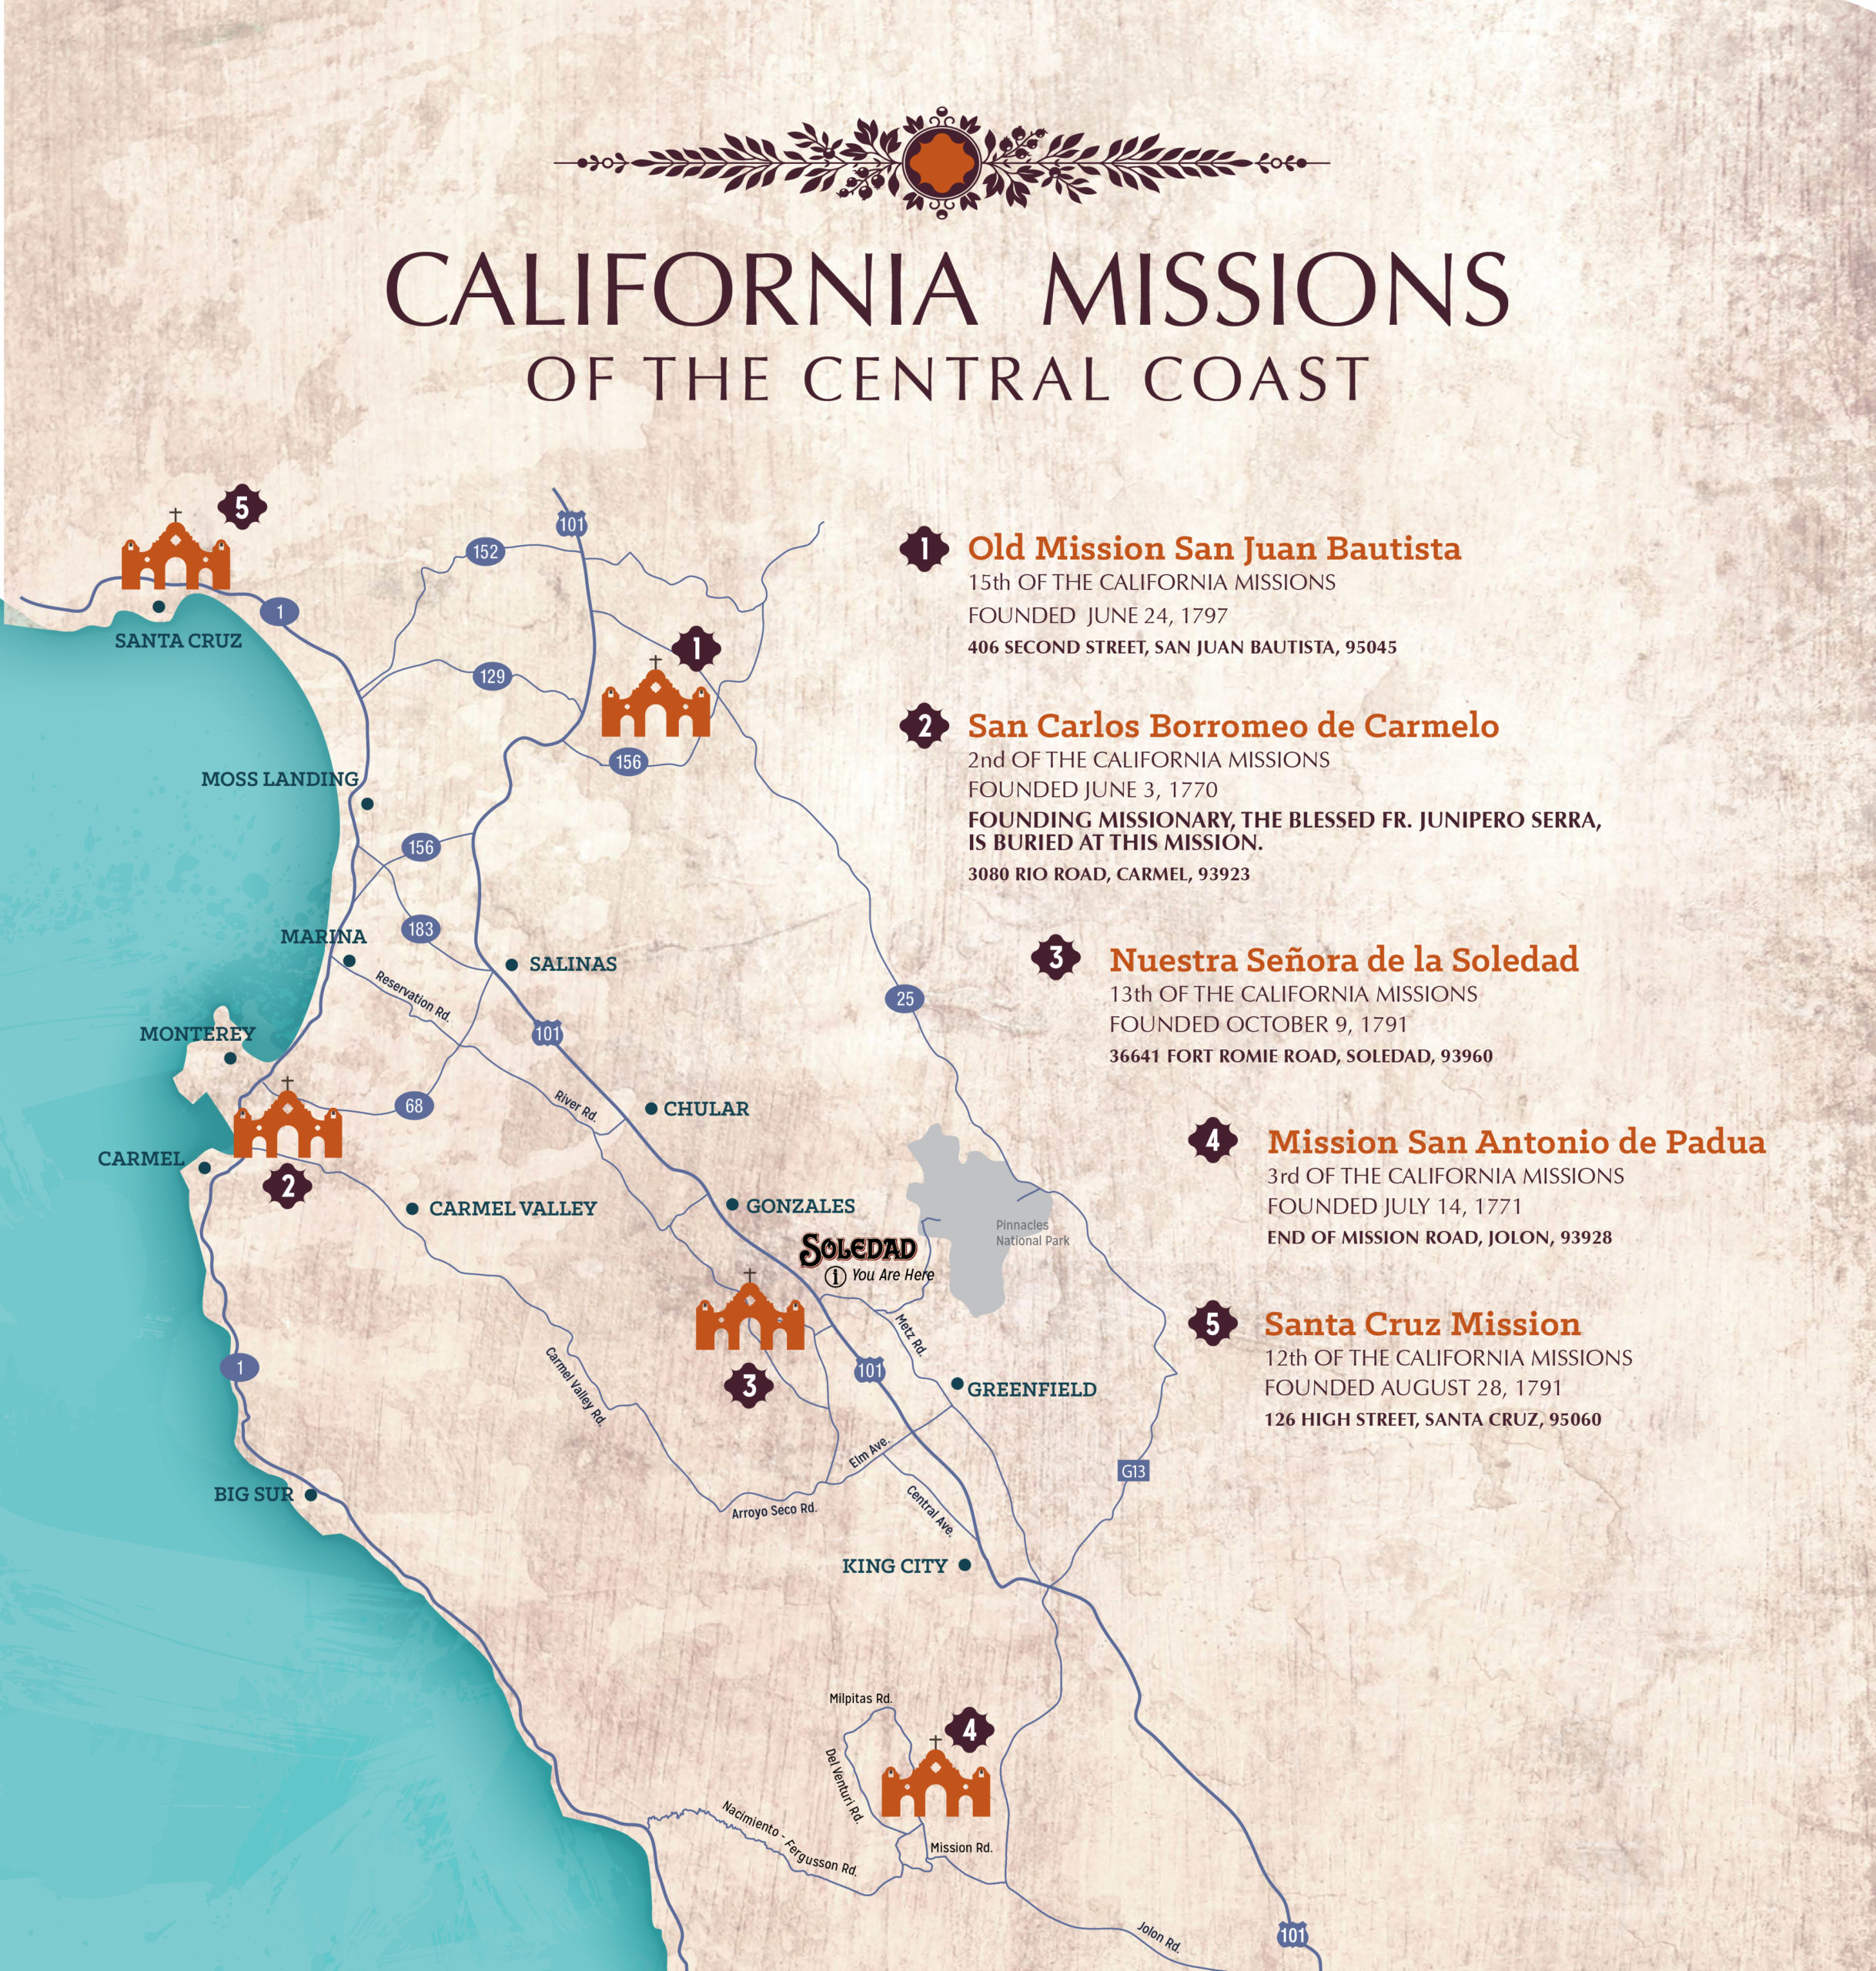 California Missions of the Central Coast